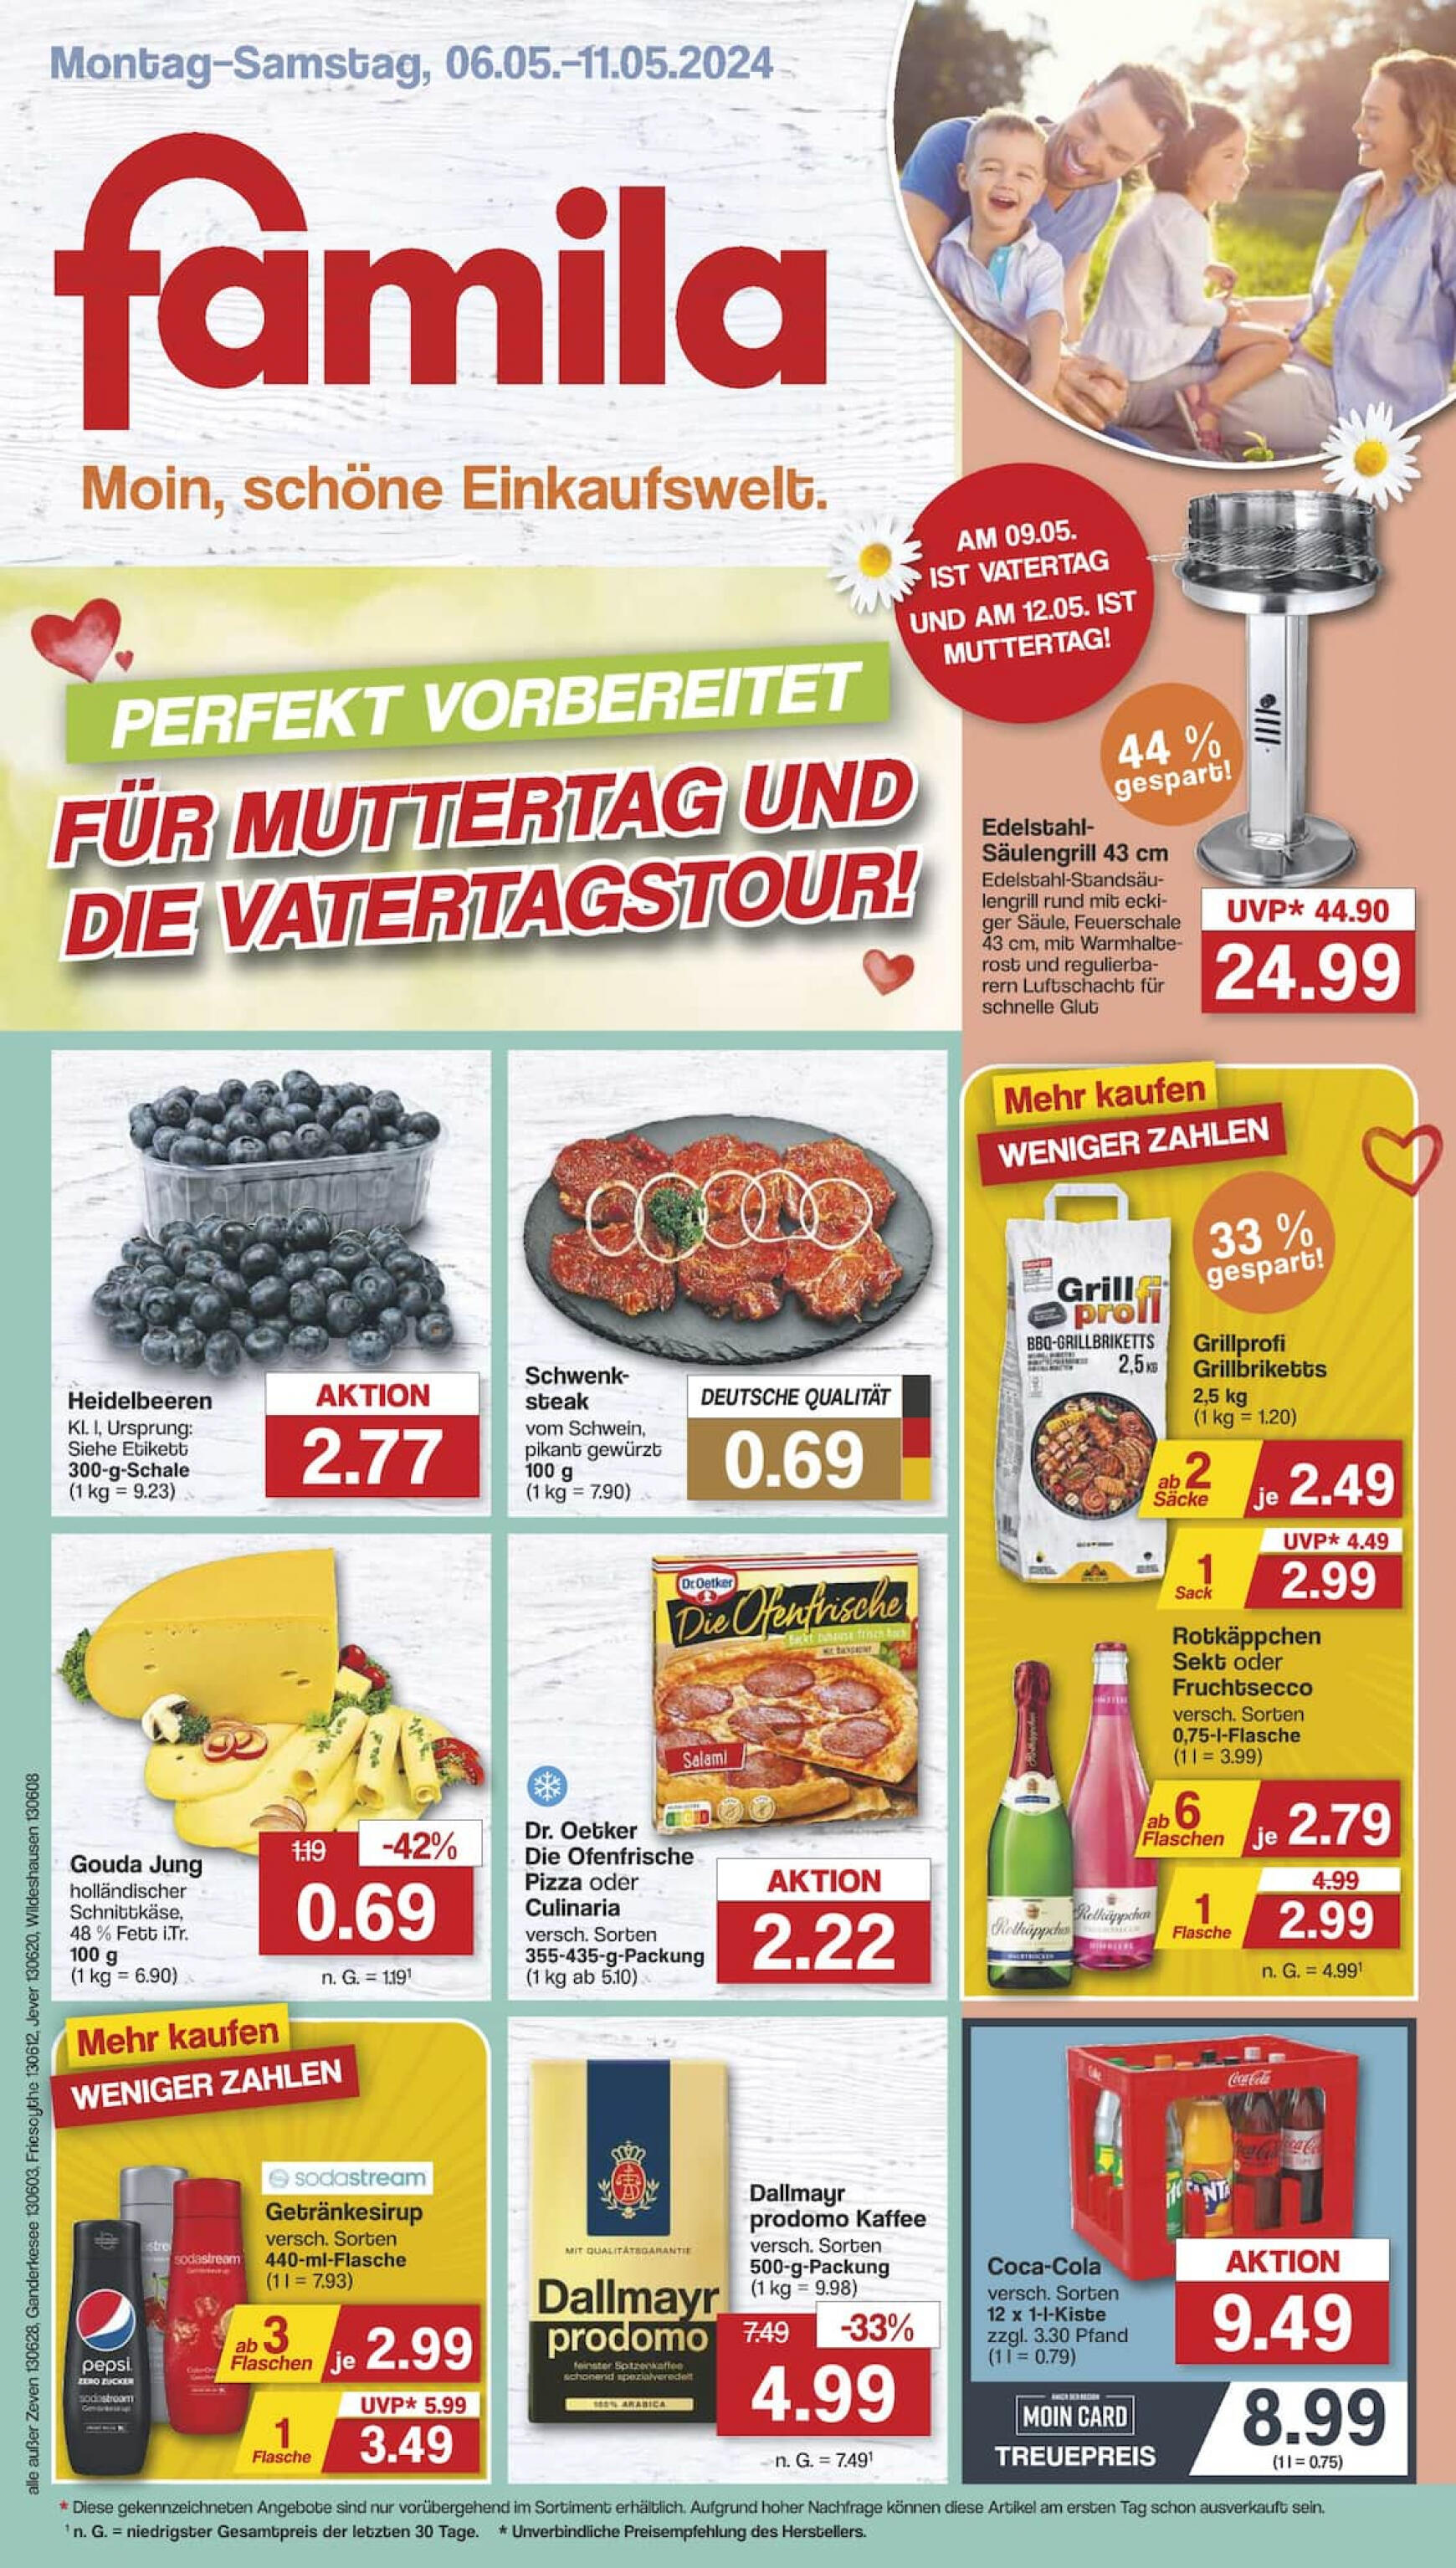 famila-nordwest - Flyer Famila Nordwest aktuell 06.05. - 11.05. - page: 1